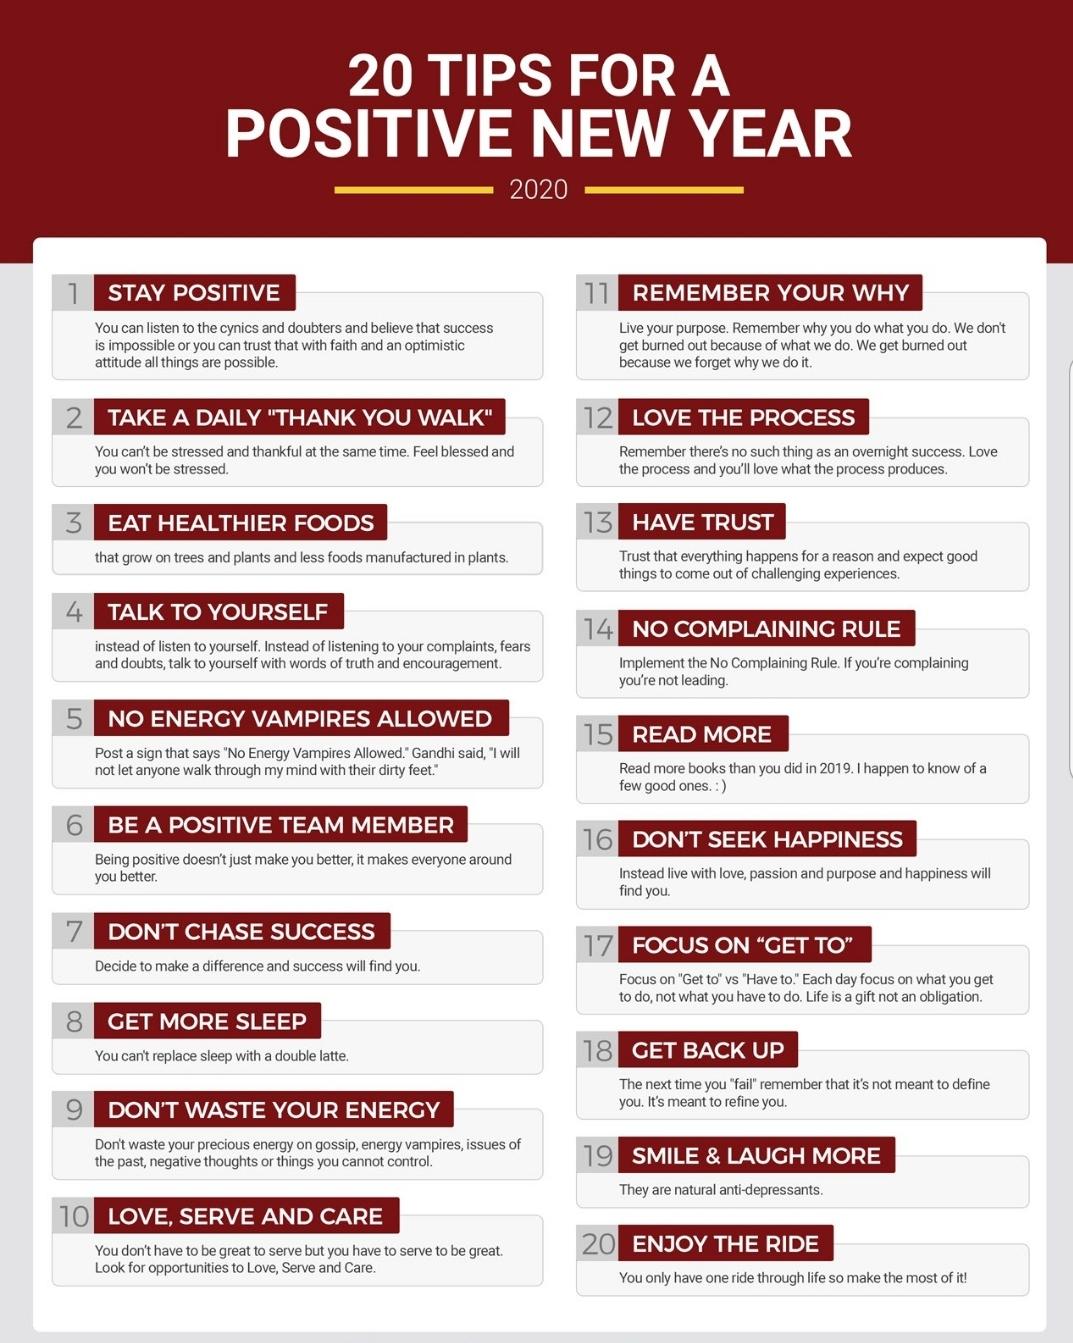 As we get ready to start a new year, attention is turned to setting goals and resolutions.